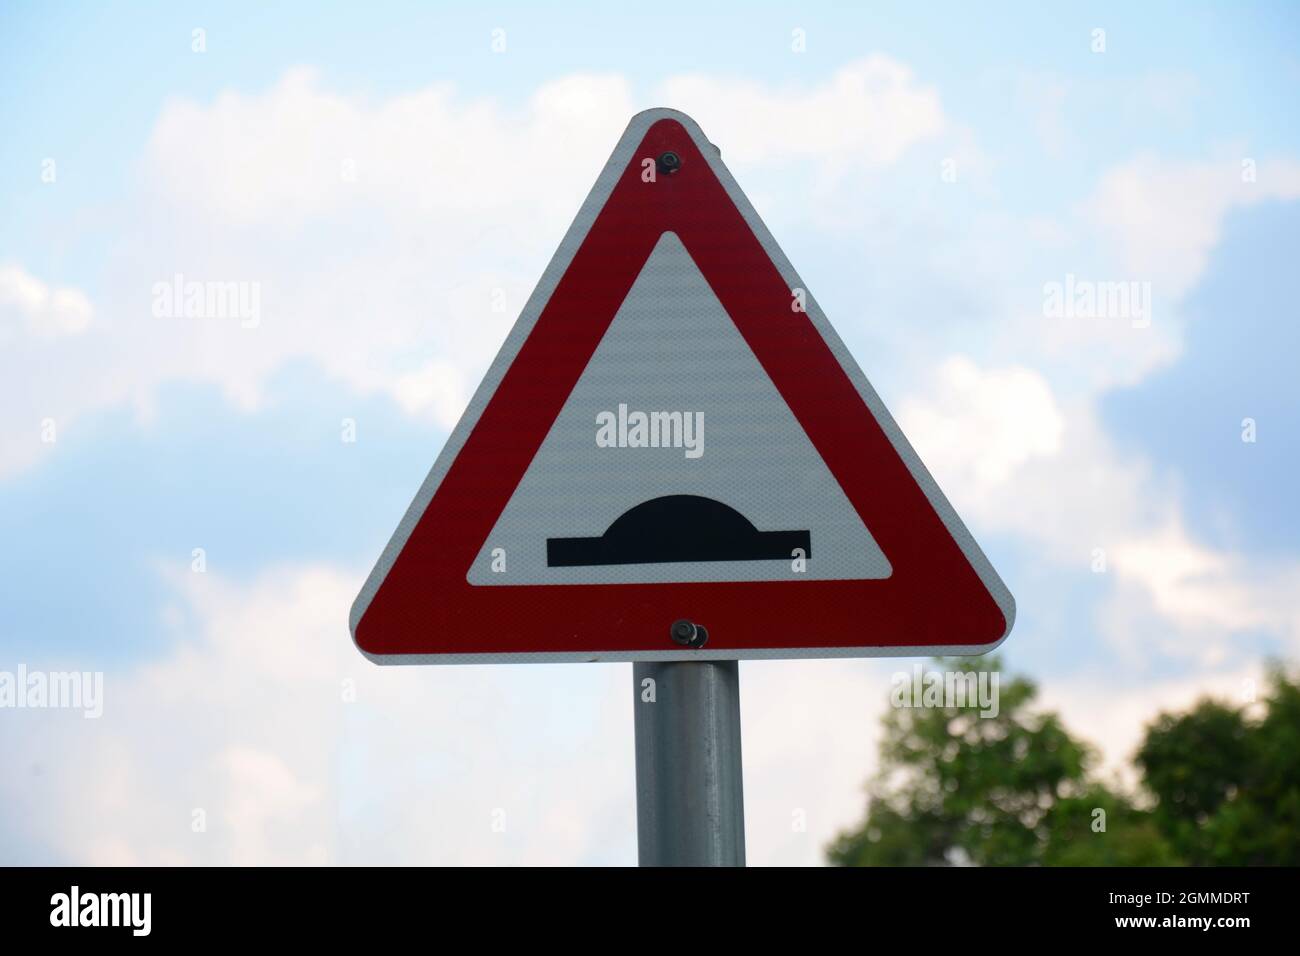 Speed bump sign. Triangle traffic sign warning there is a threshold coming up in the road. Symbol against a blue sky with clouds and trees. Signs givi Stock Photo